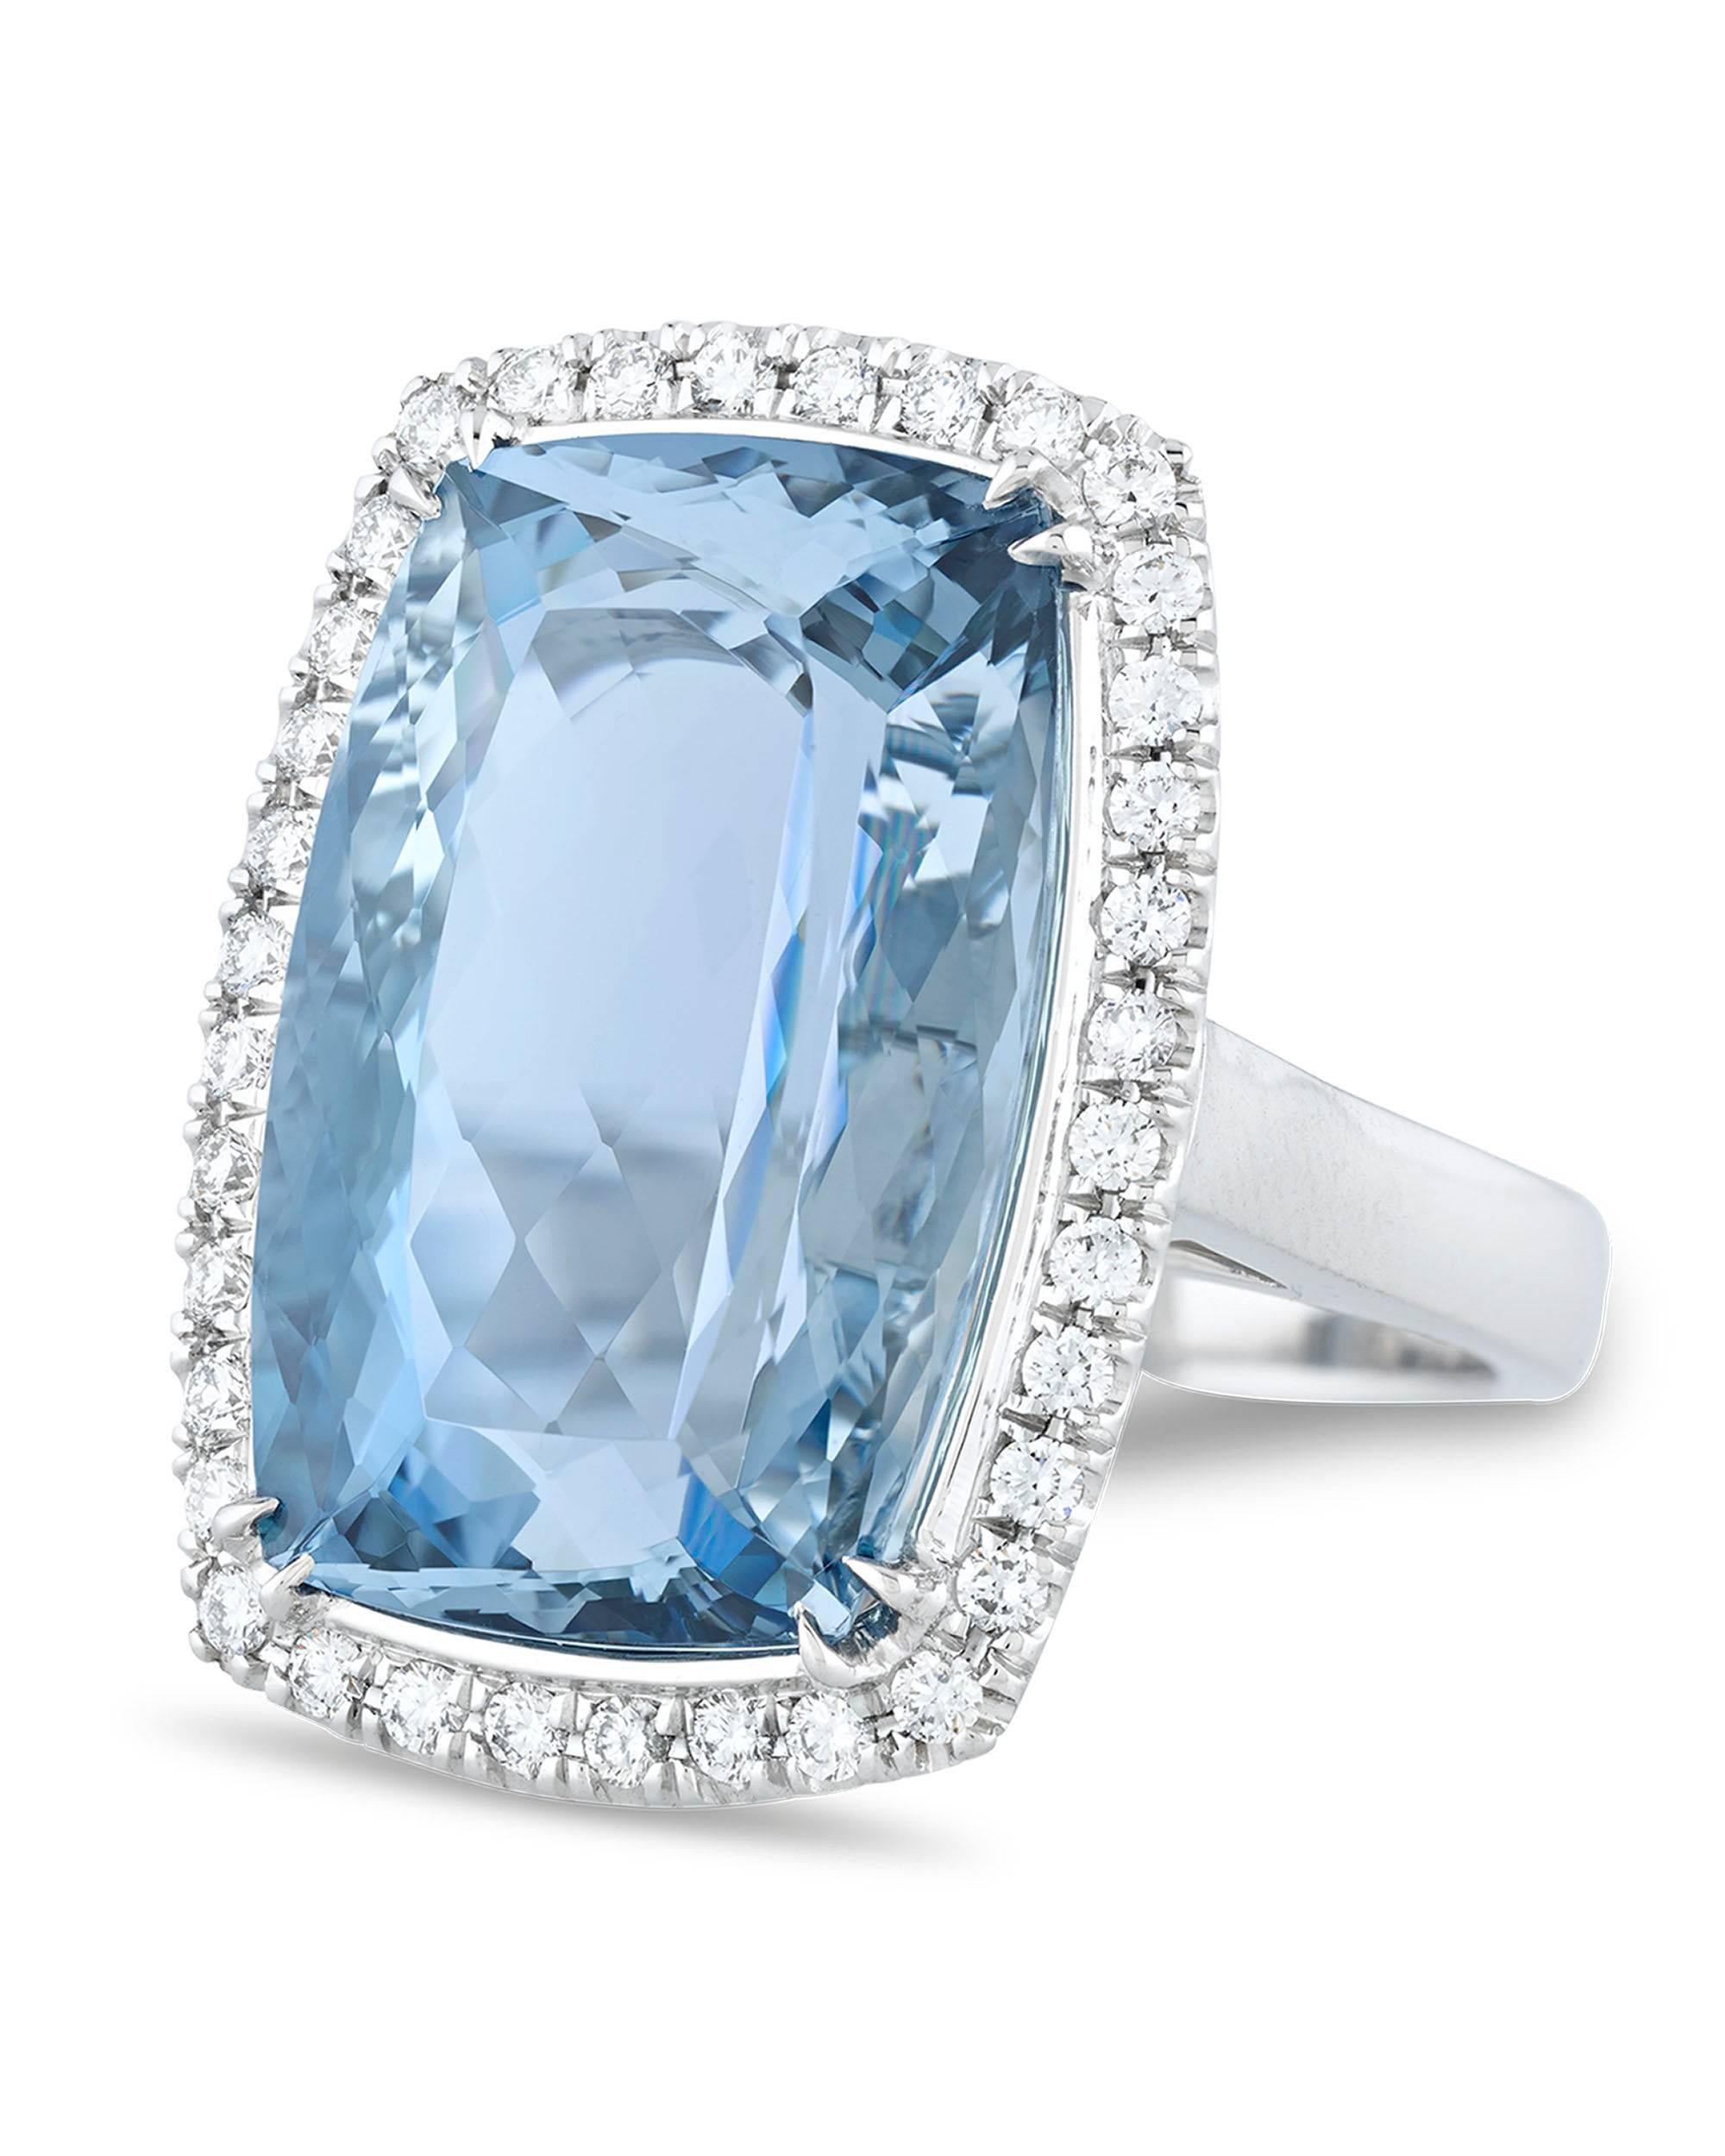 Weighing an impressive 18.52 carats, this cushion-cut aquamarine entrances with its azure hue and fantastic clarity. This wondrous jewel is surrounded by 36 glistening white diamonds totaling 0.53 carats. With a name derived from the Latin for